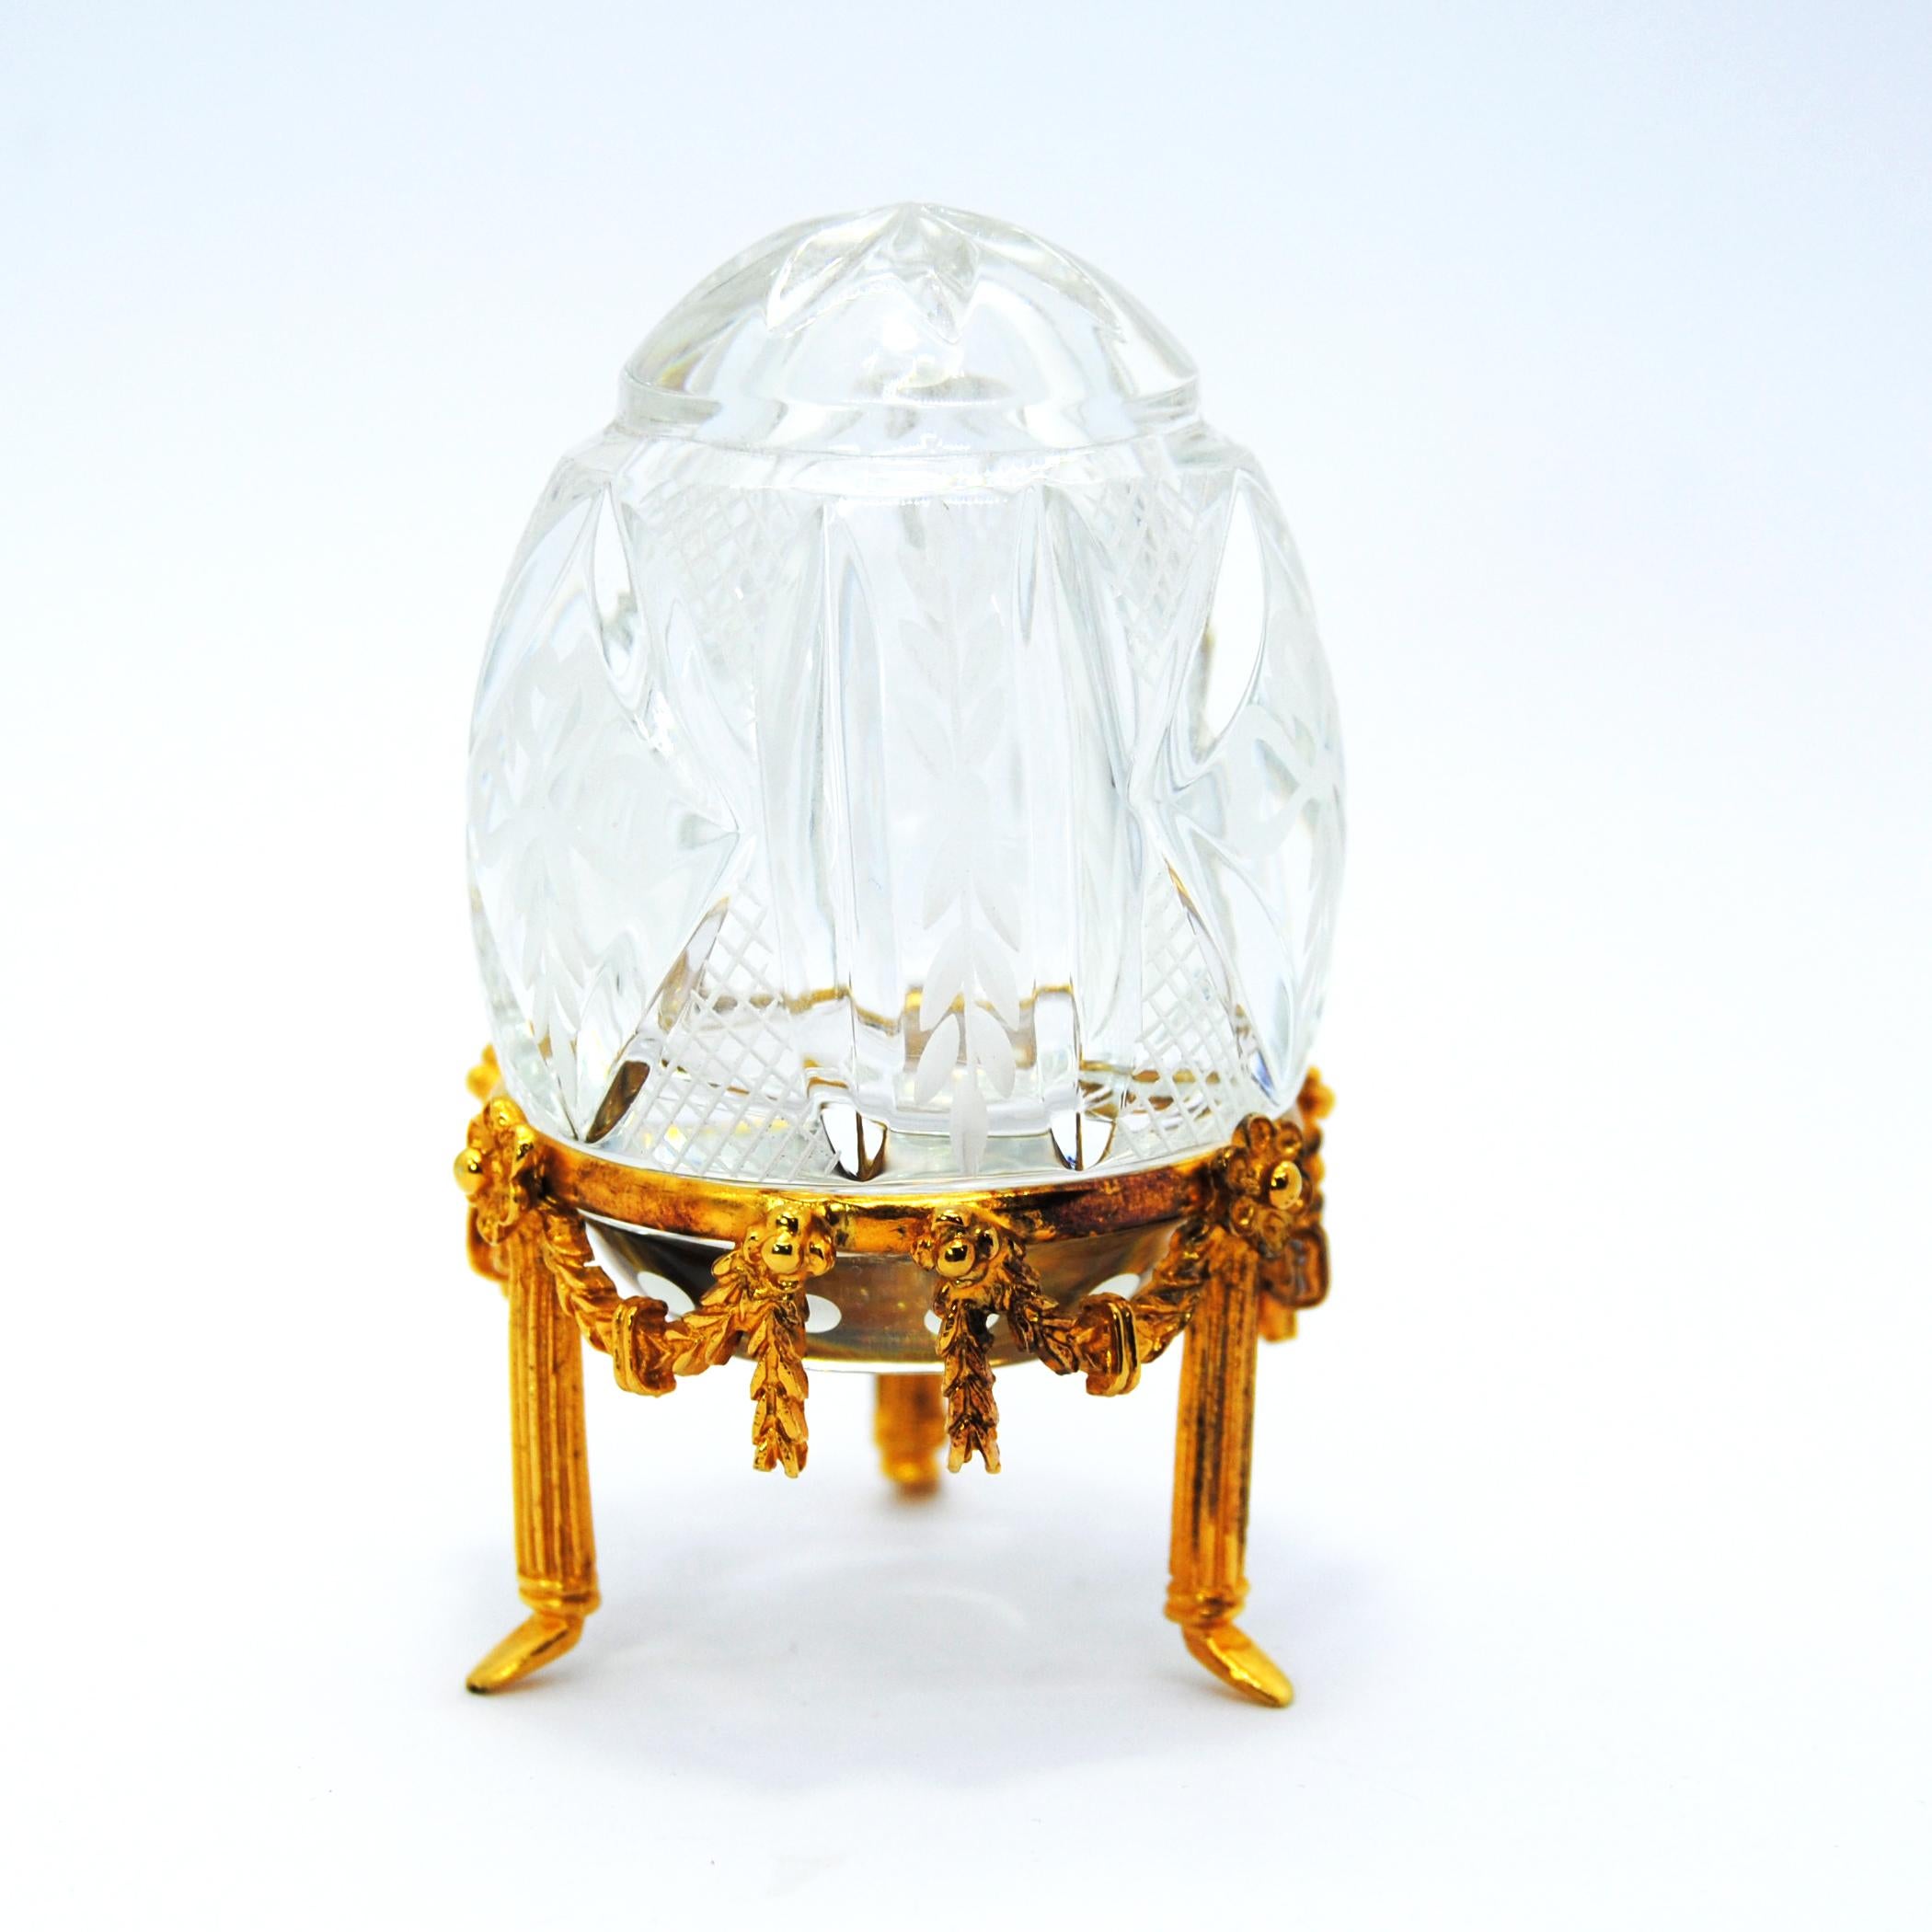 Empire Star of the North Faberge Egg Crystal with Sterling Silver Gold-Plated Base